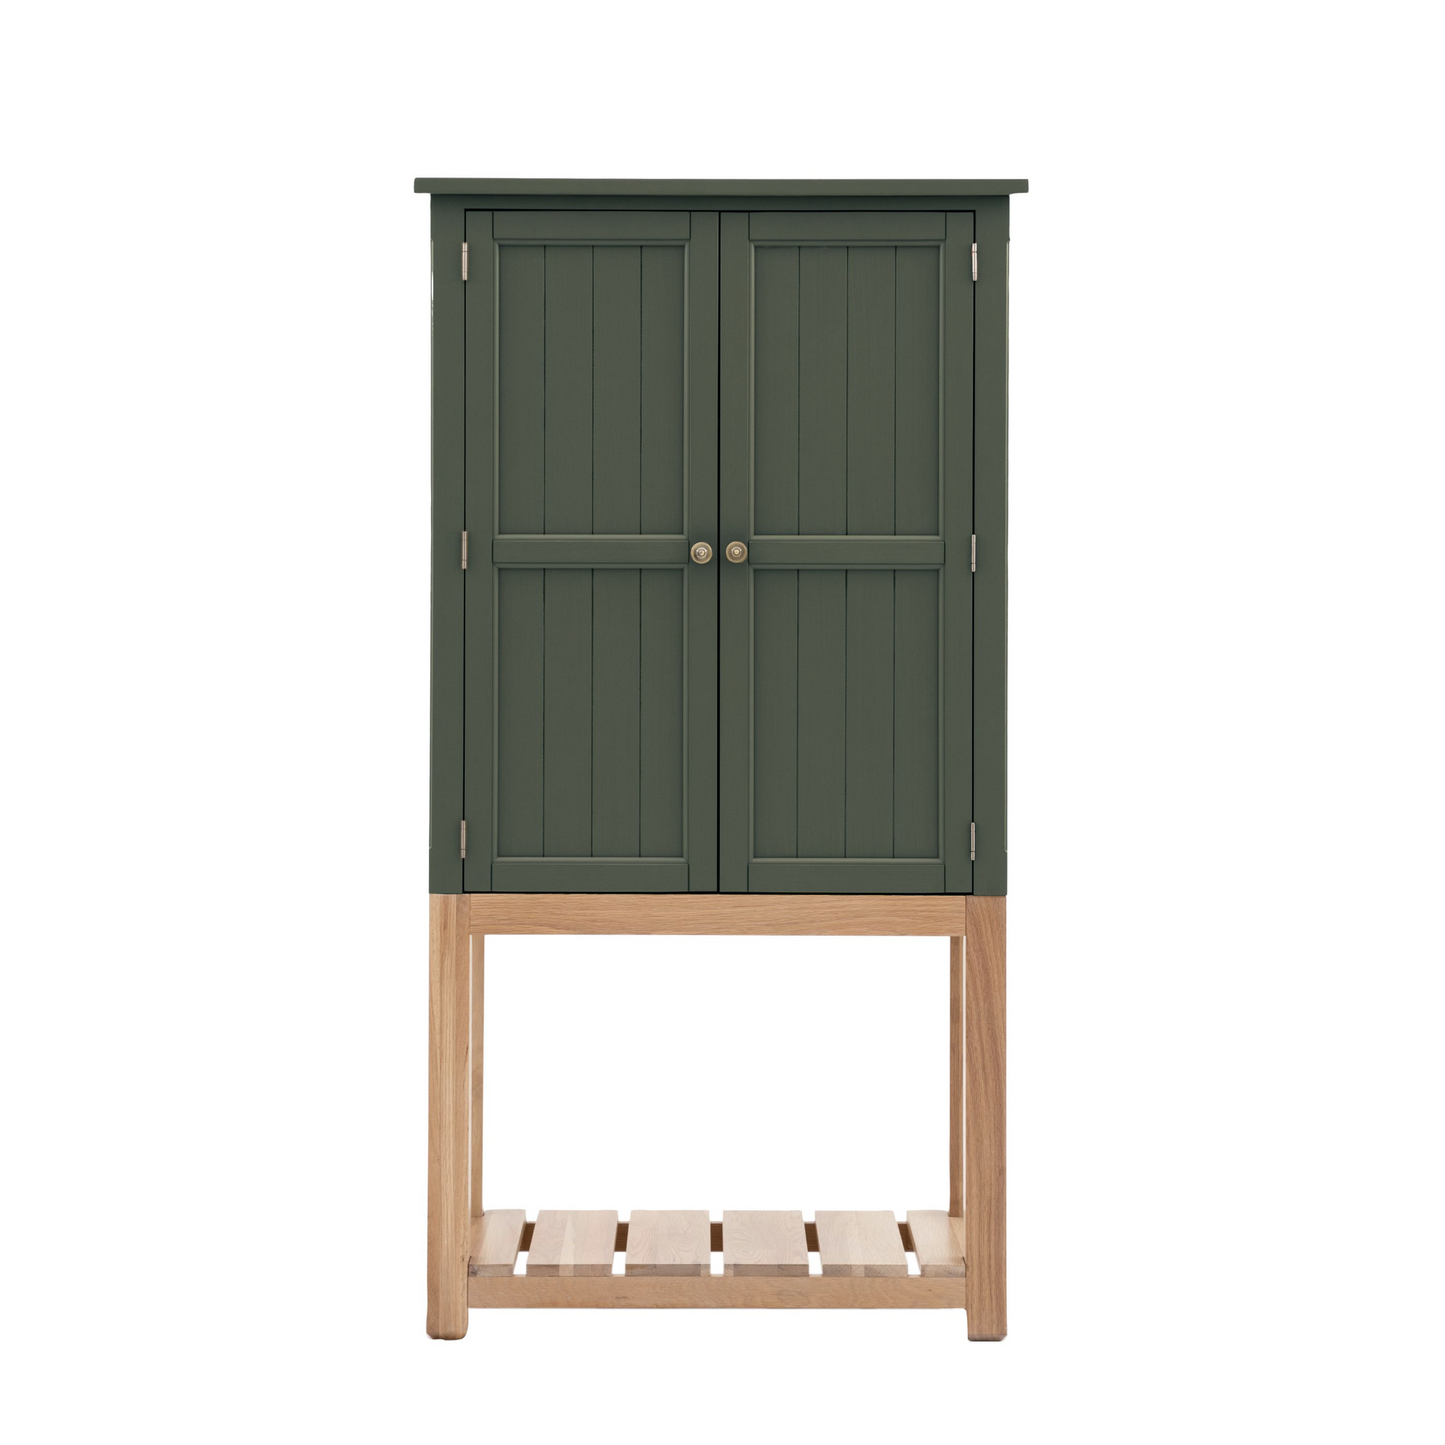 A Buckland 2 Door Storage Cupboard in Moss by Kikiathome.co.uk for interior decor and home furniture.